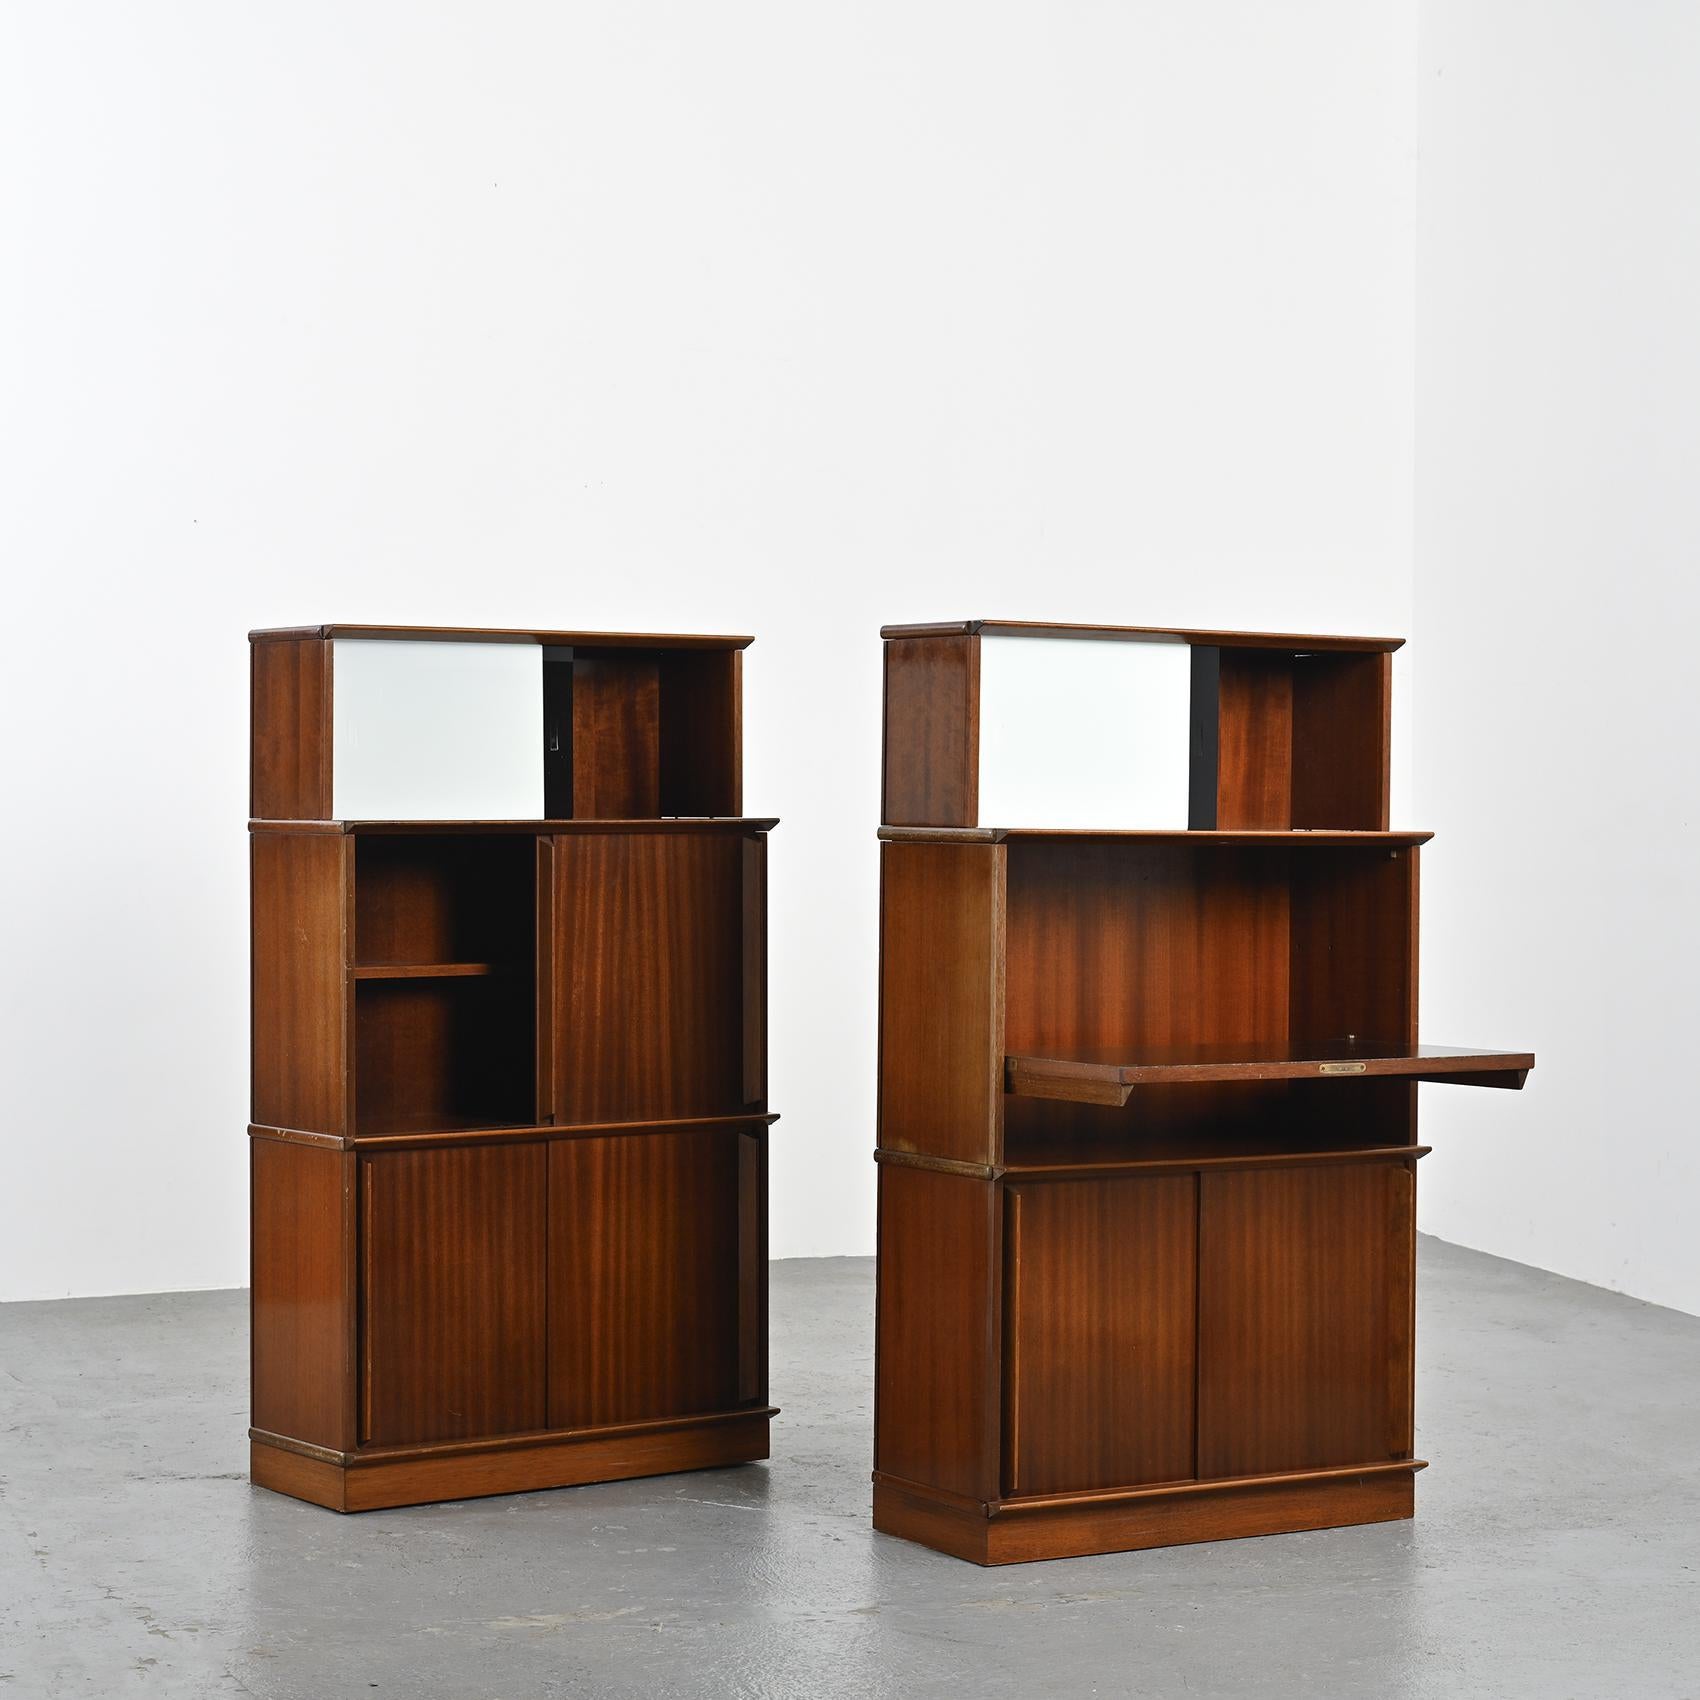 French Pair of Cabinets, Meubles OSCAR, France 1955